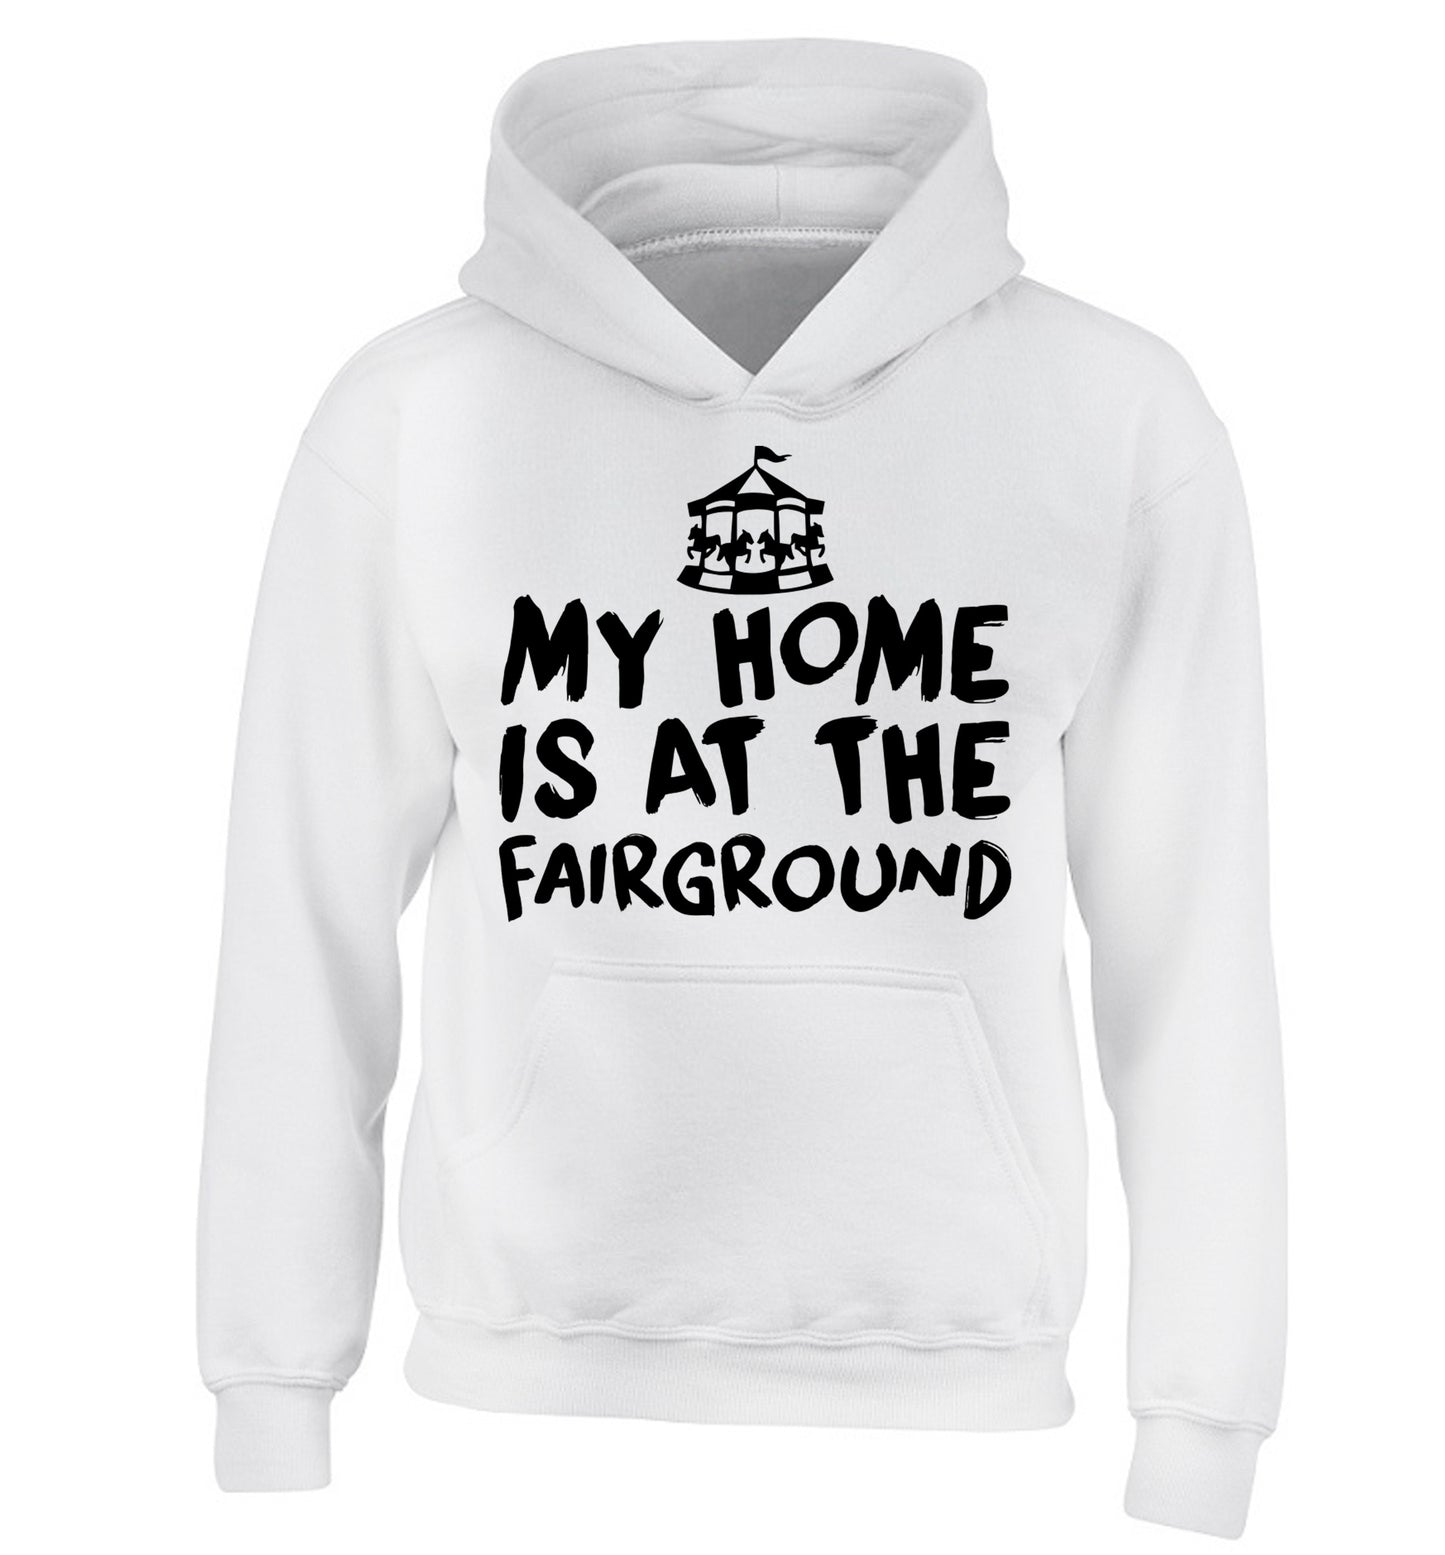 My home is at the fairground children's white hoodie 12-14 Years